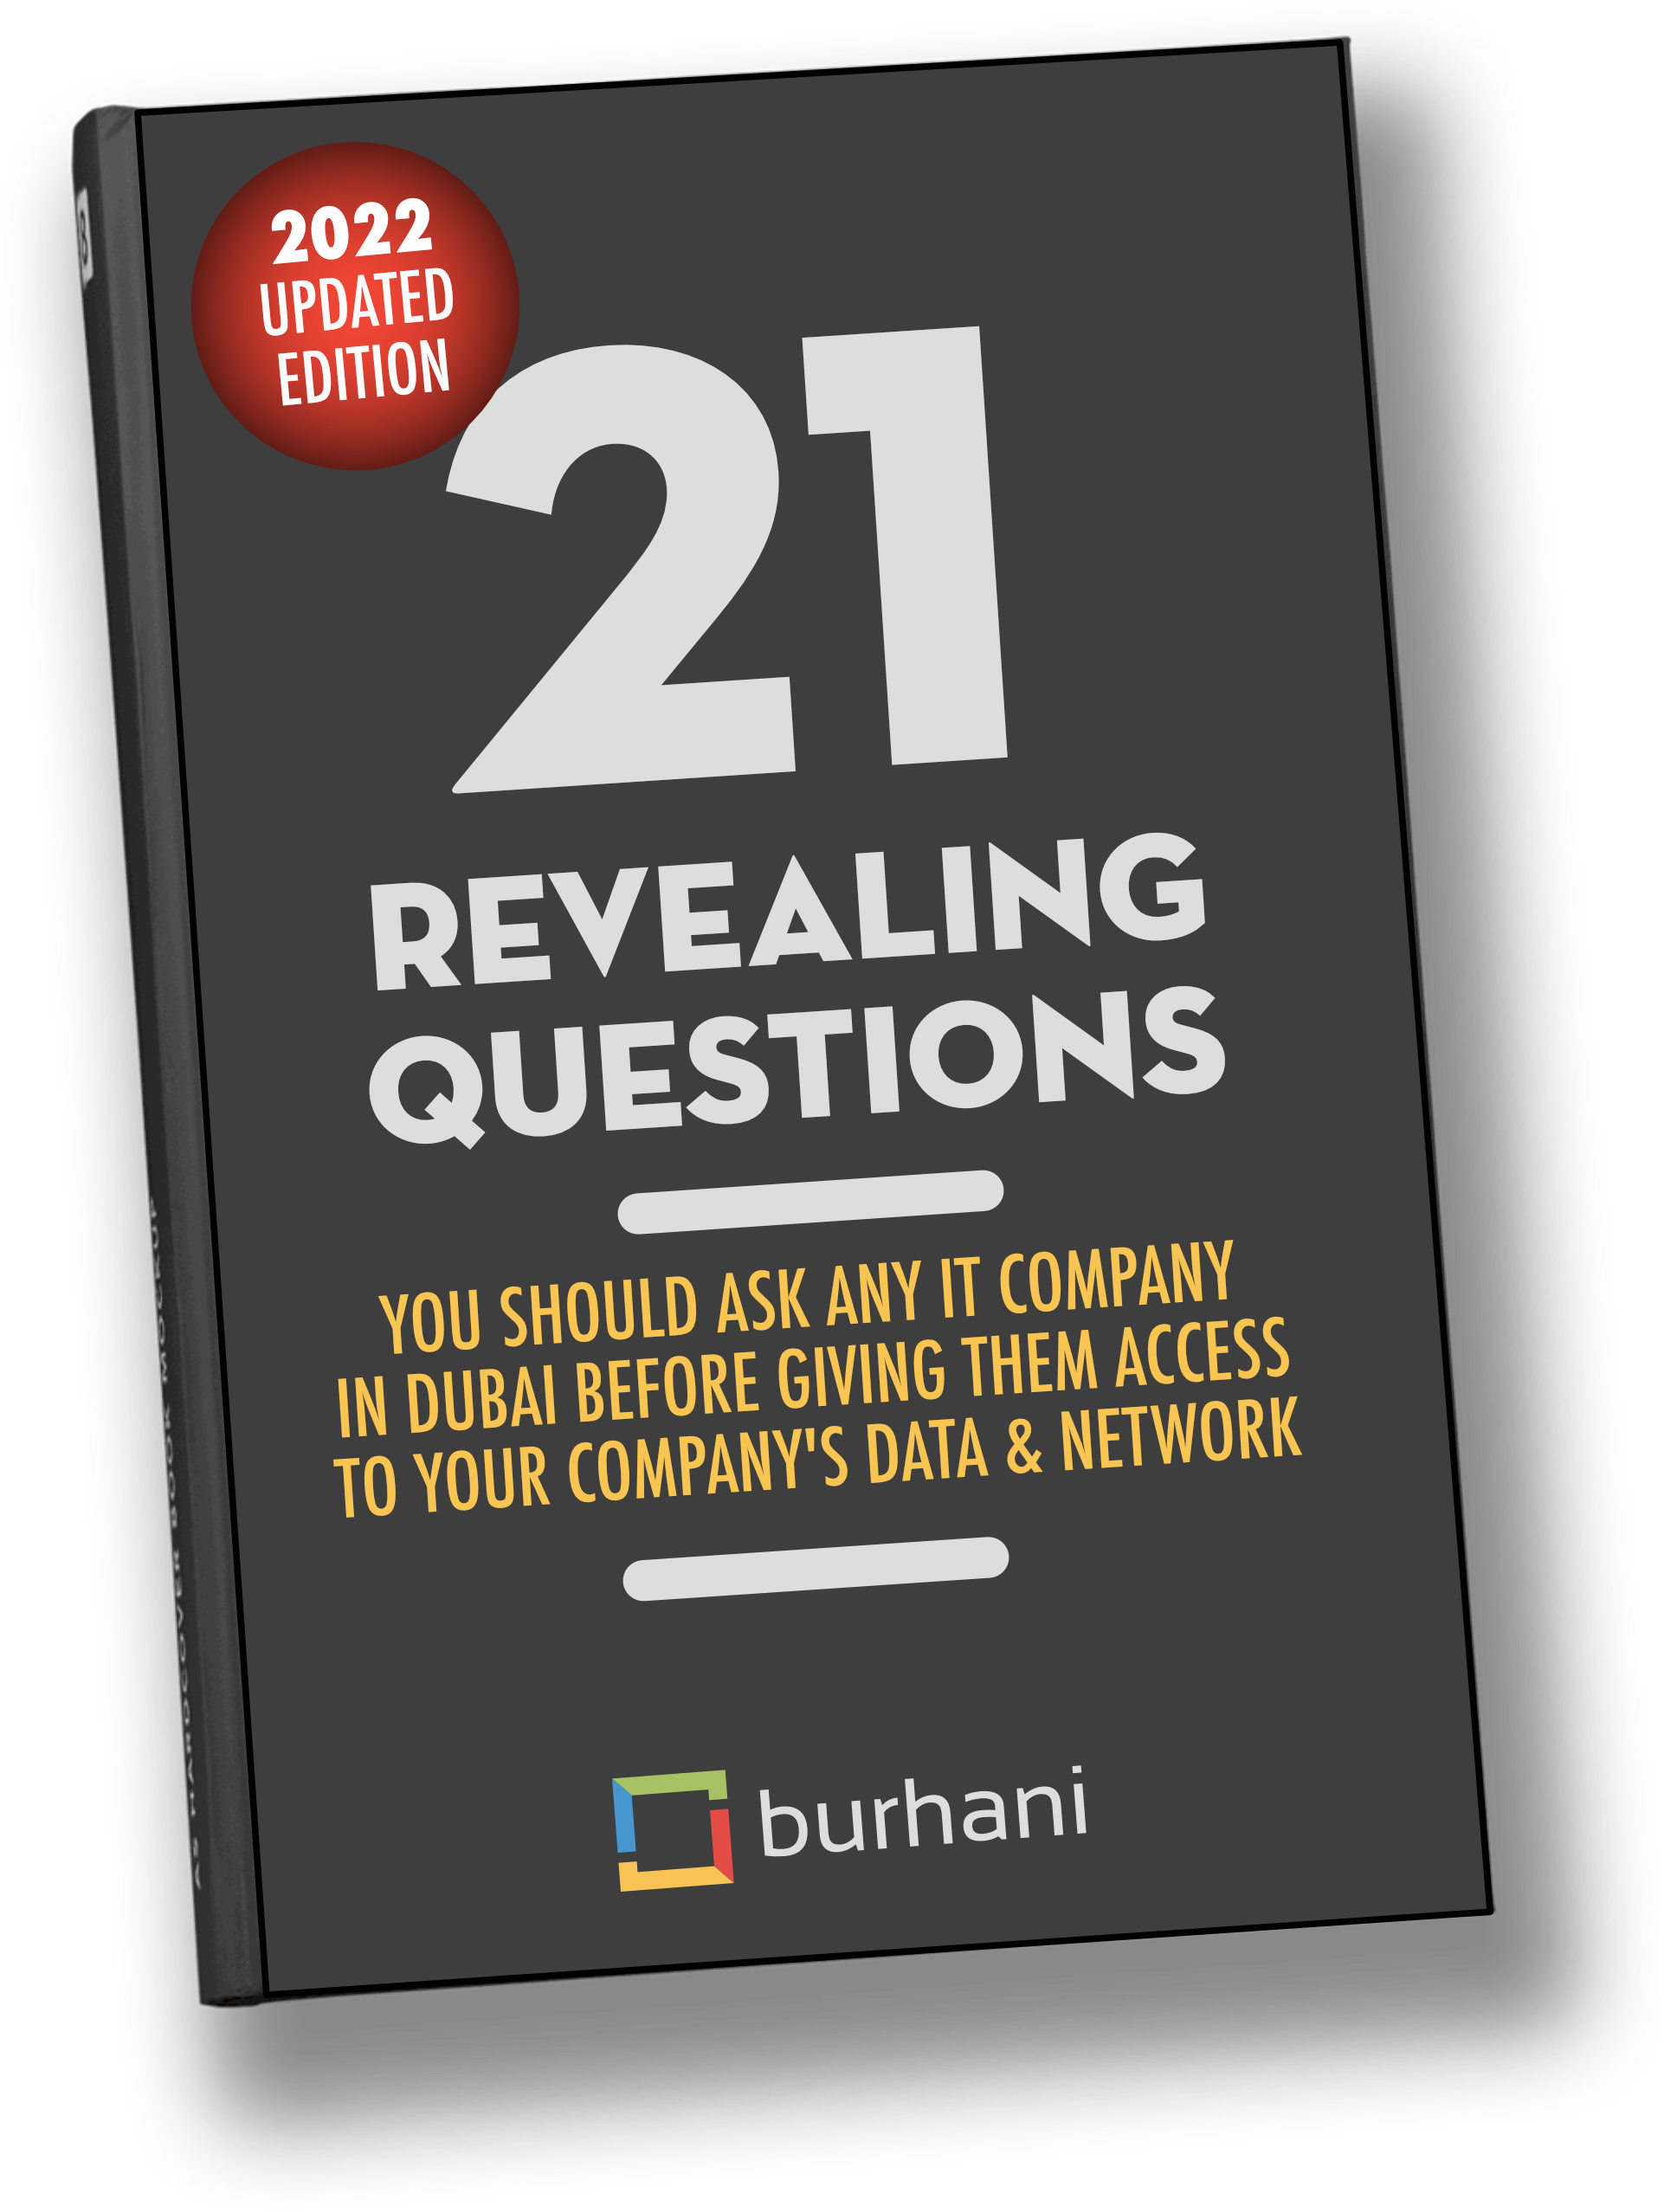 21 Revealing Questions you should ask any IT support company In Dubai before giving them access to your company’s network & data